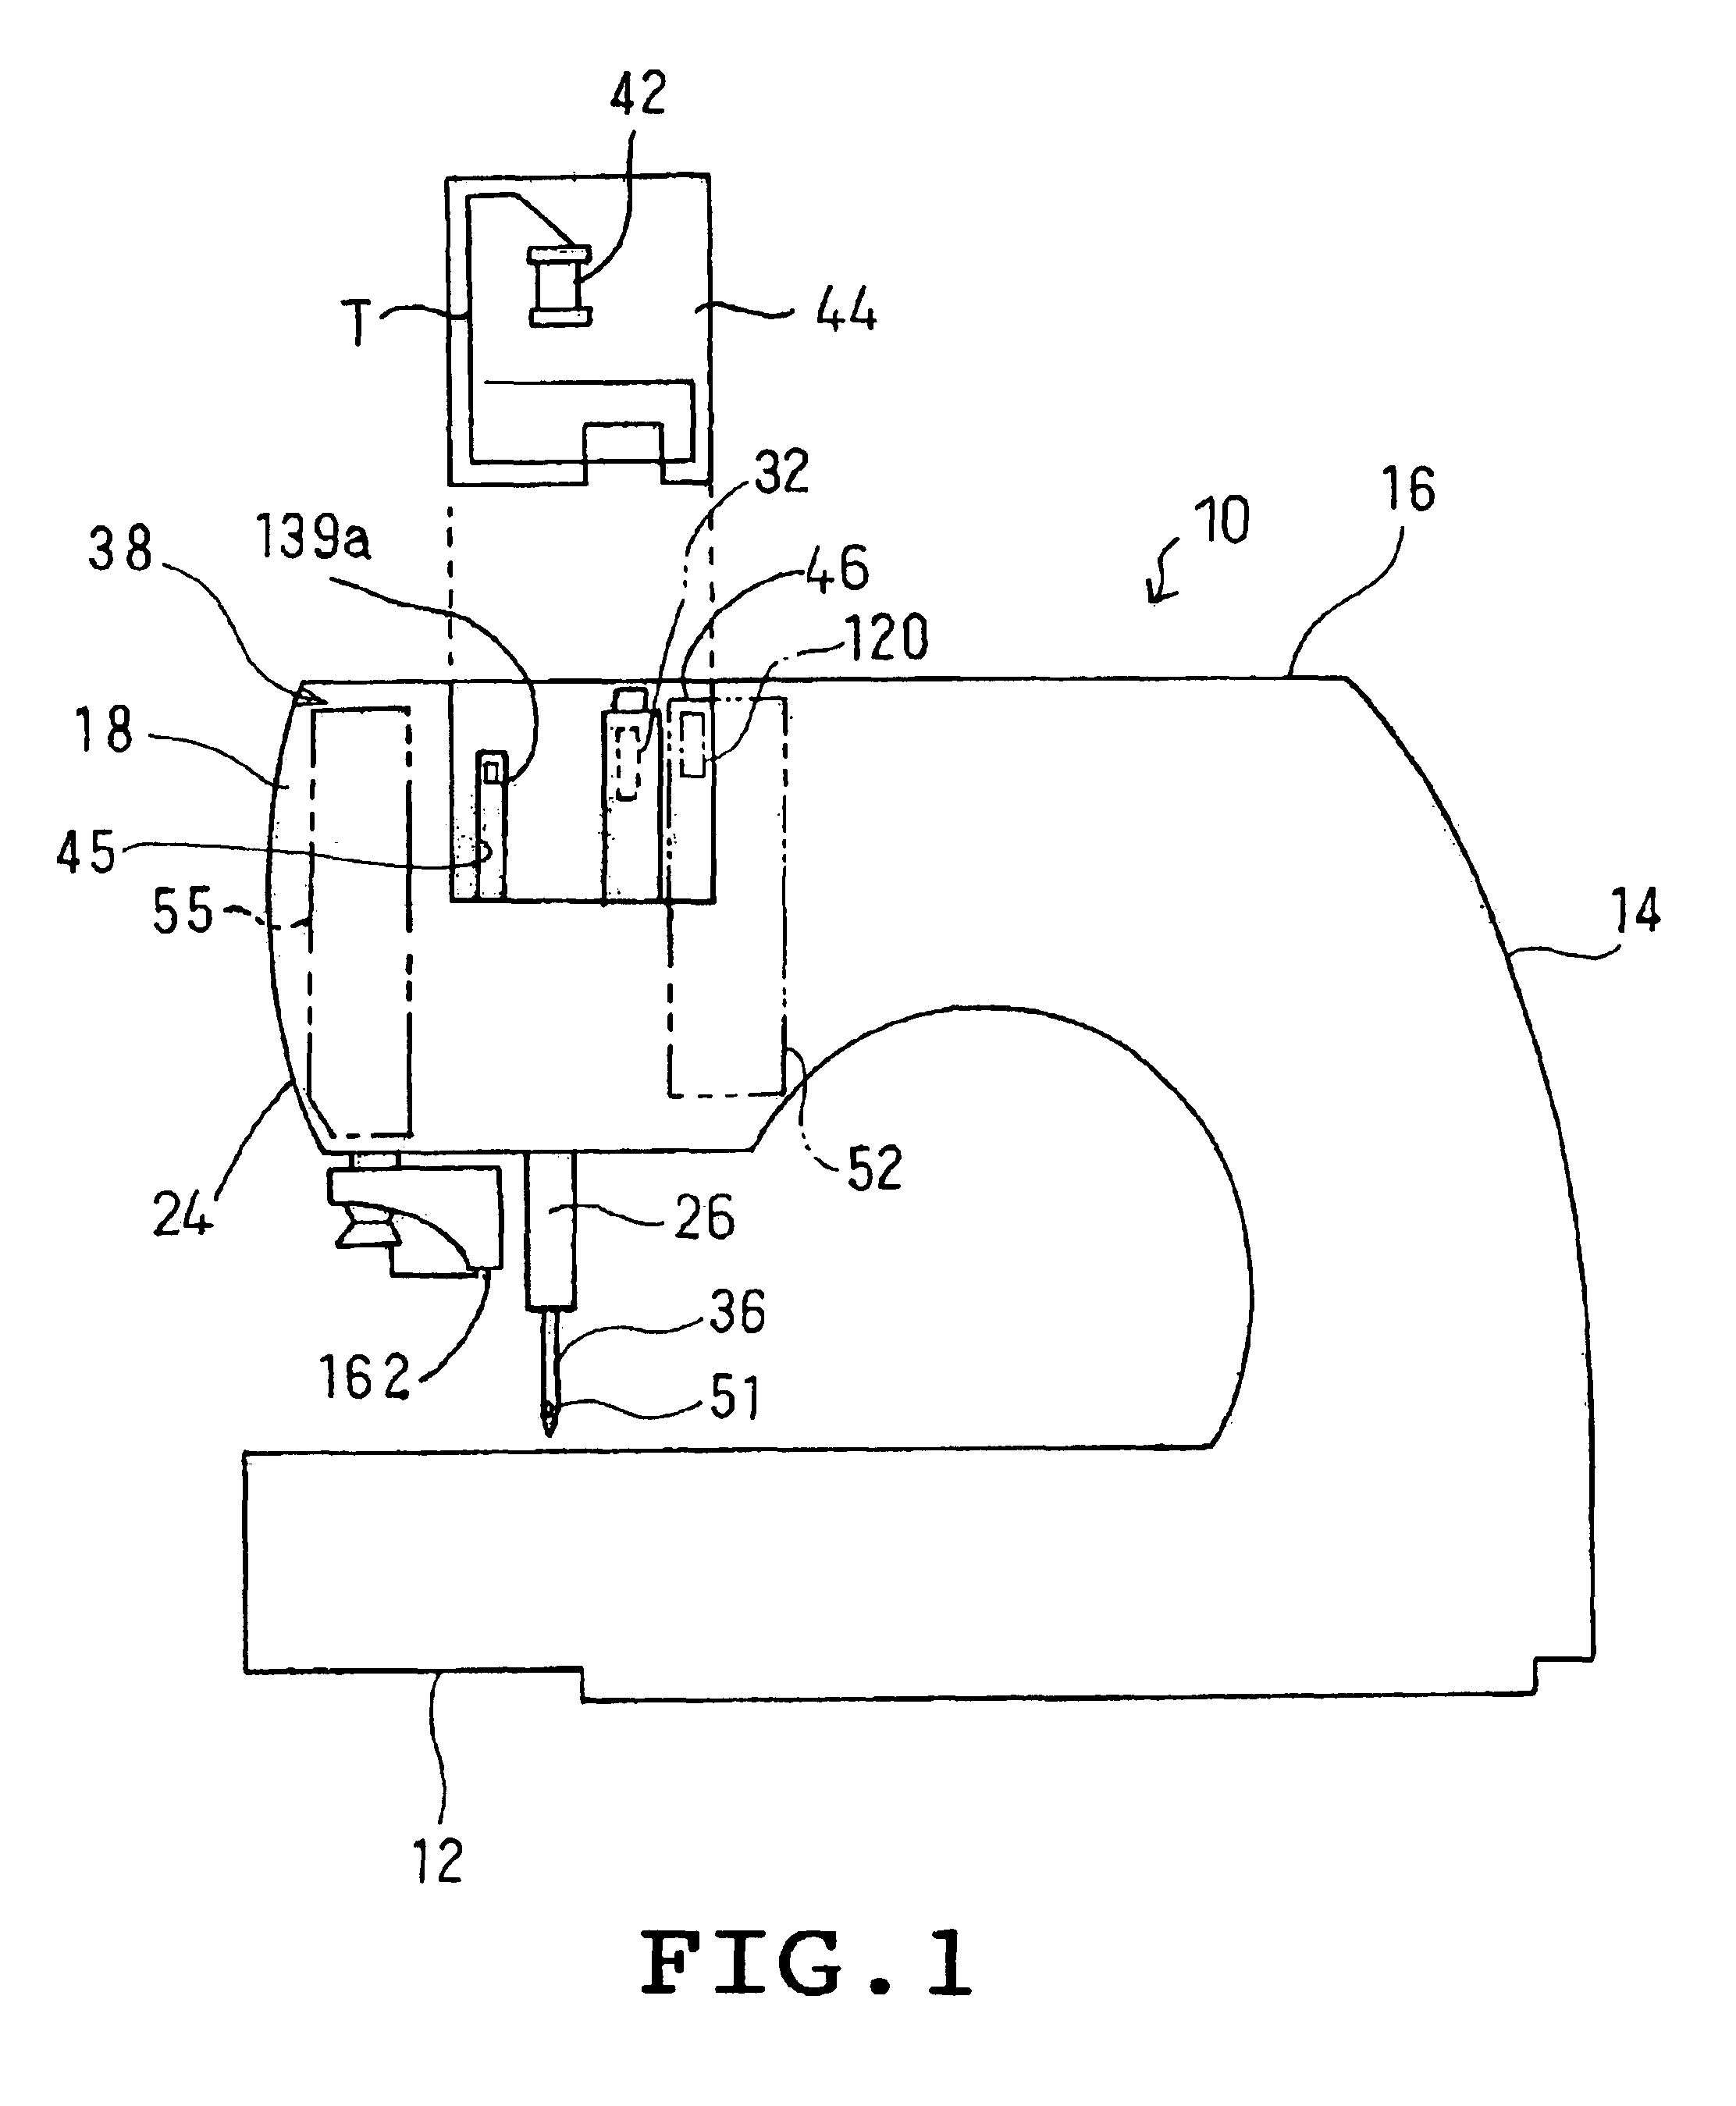 Threading apparatus for sewing machine